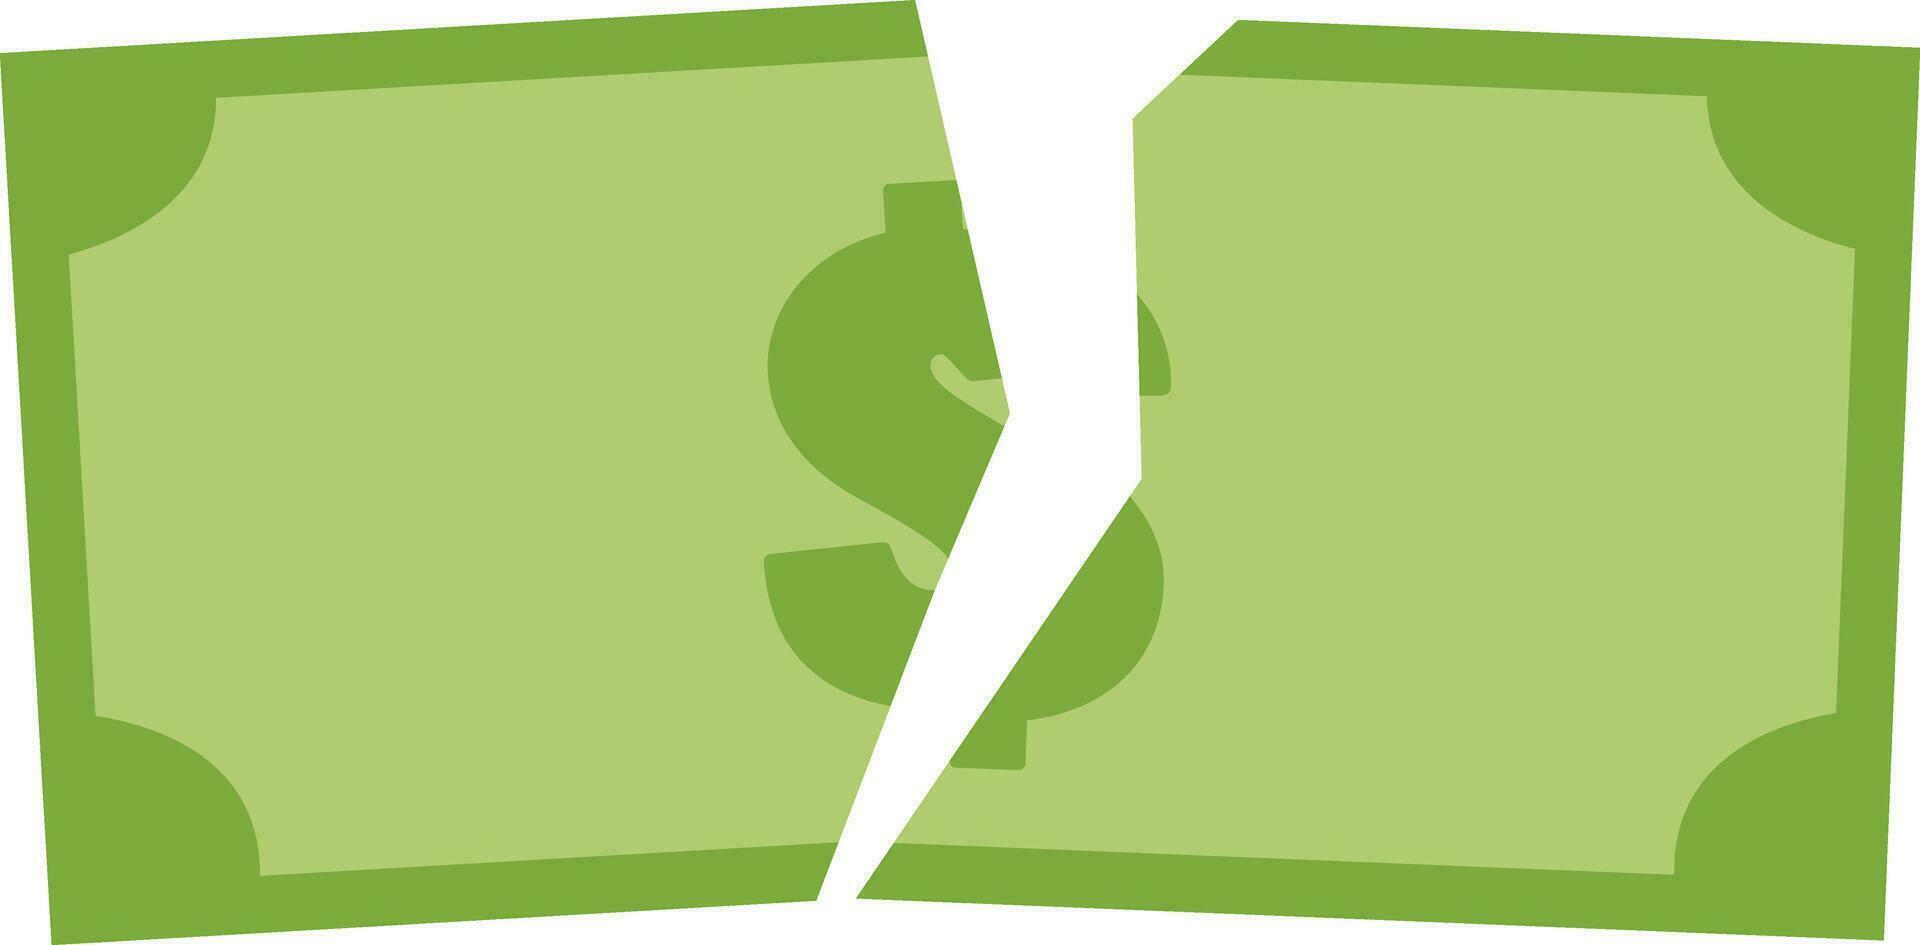 Ripped Money icon. dollar banknote money torn ripped sign. Green Ripped dollar symbol. flat style. vector